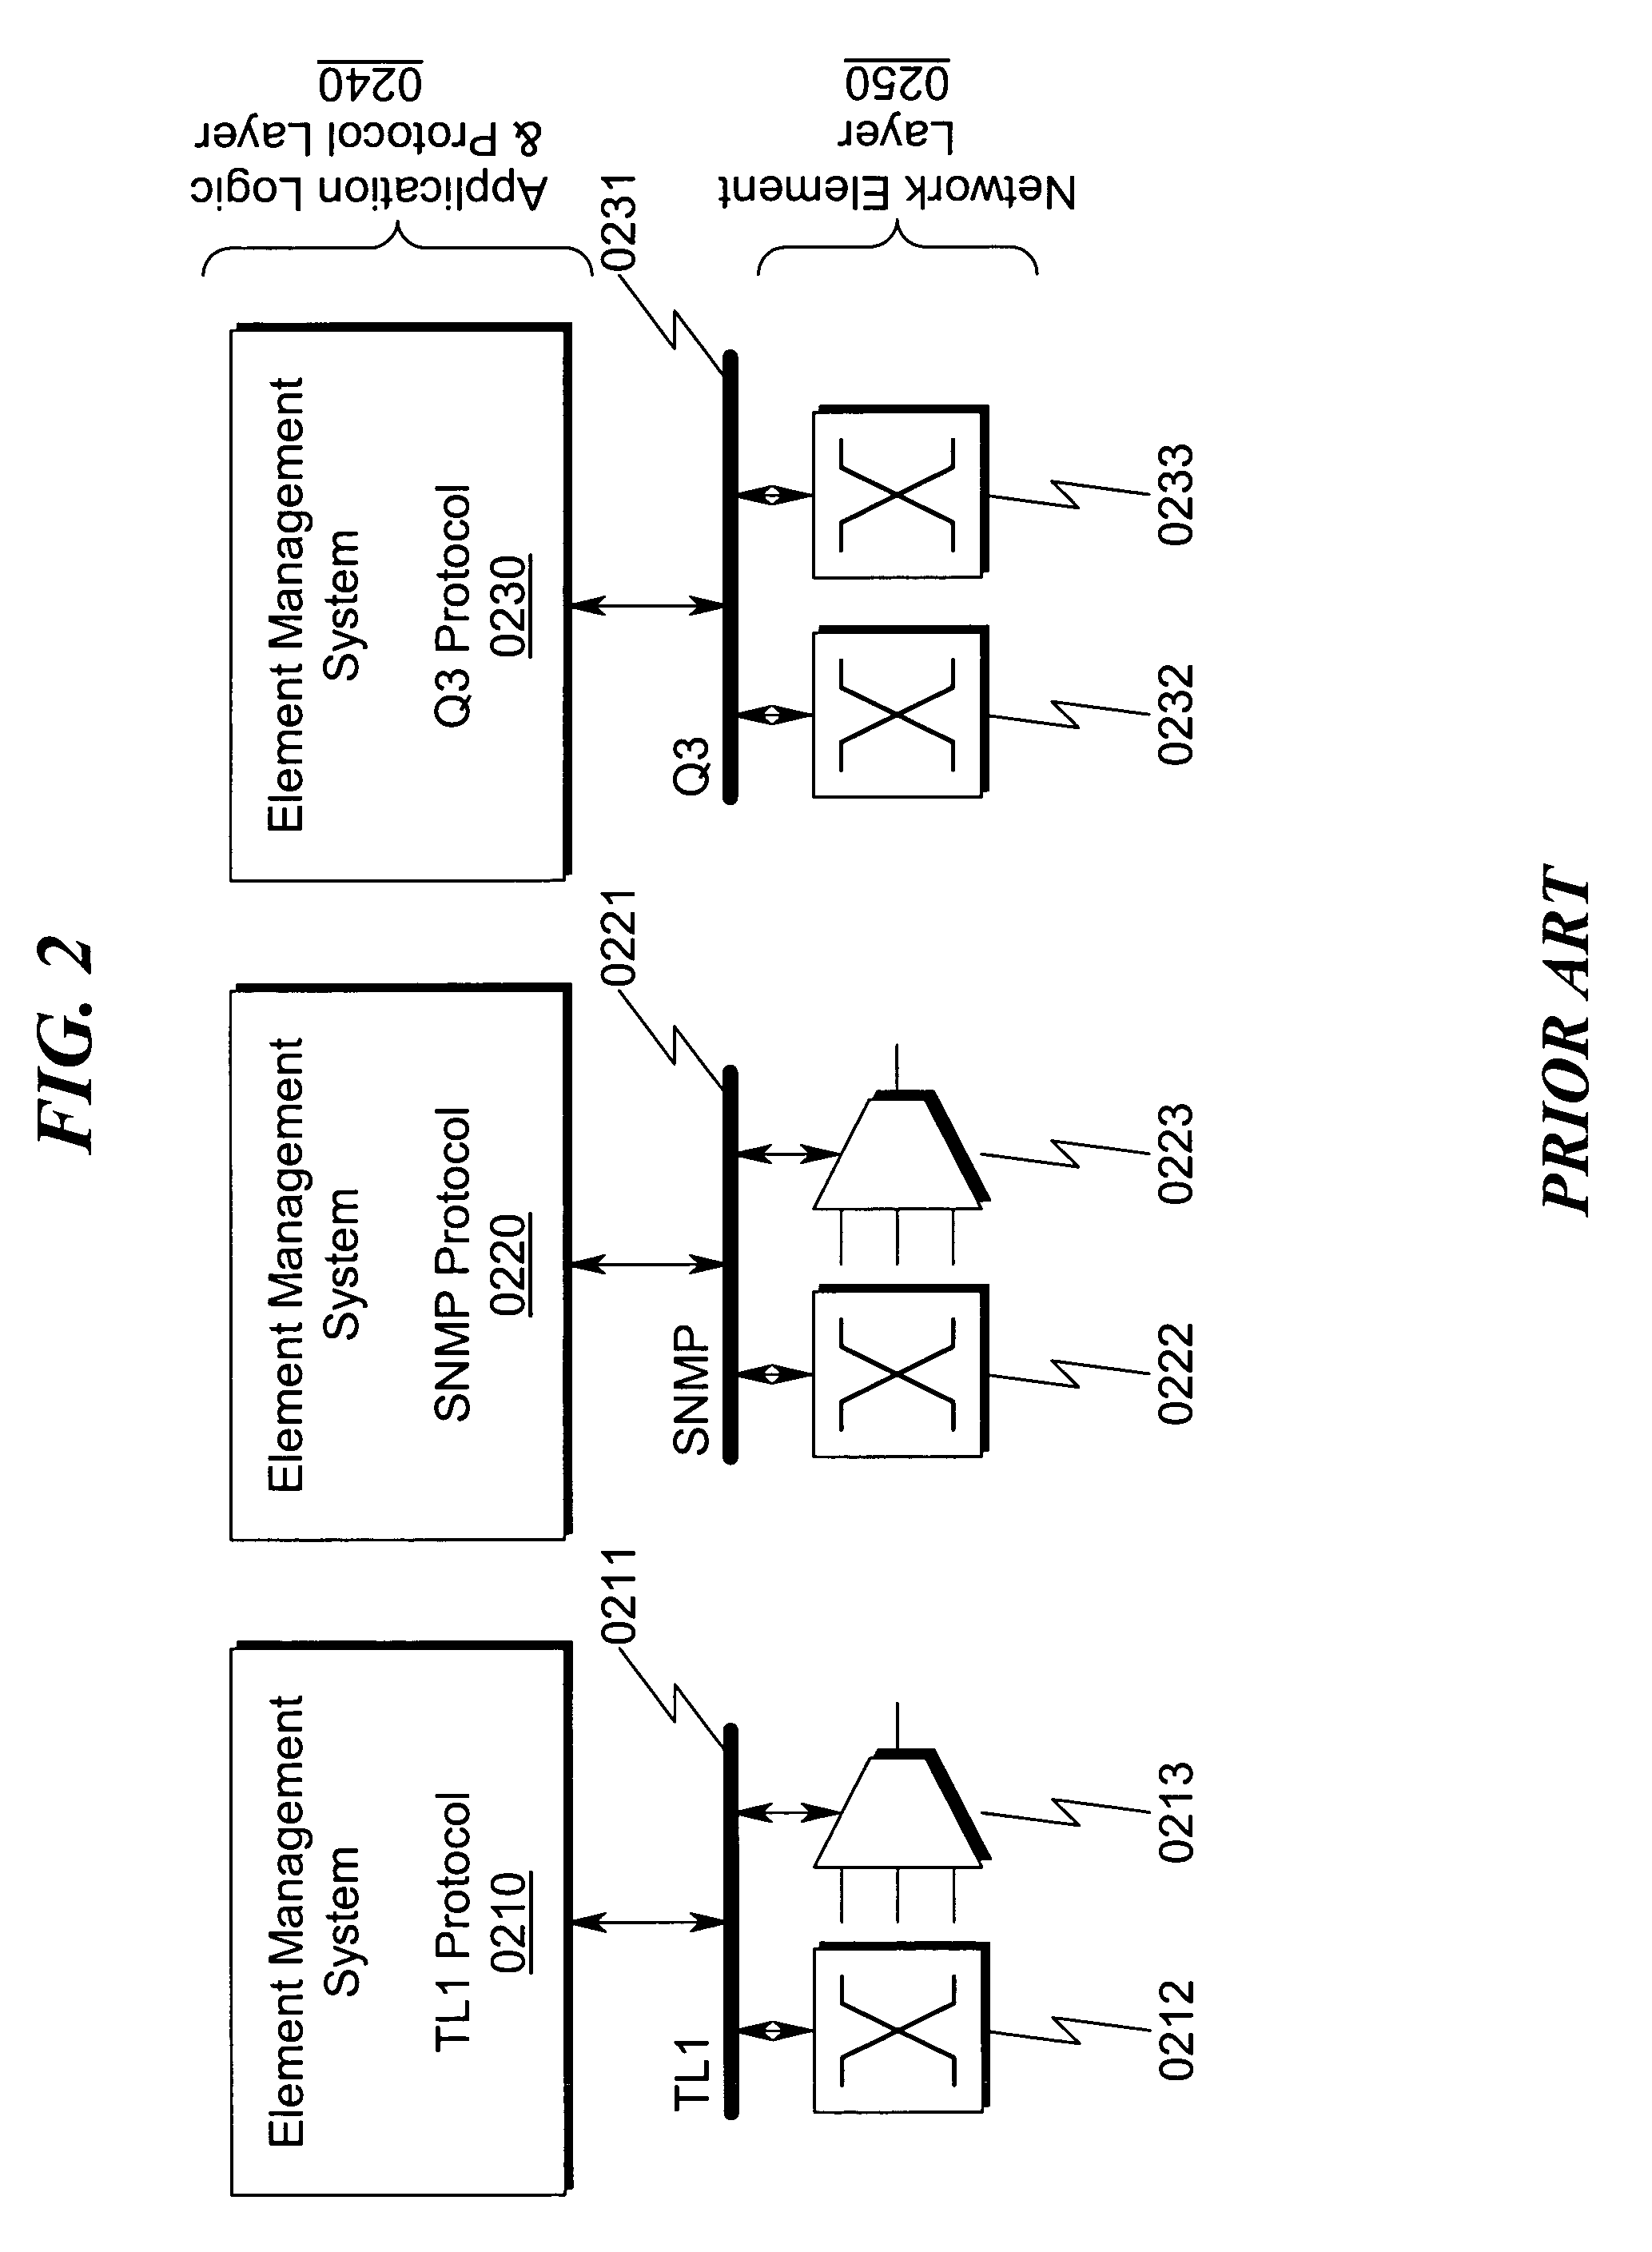 Element manager common gateway architecture system and method